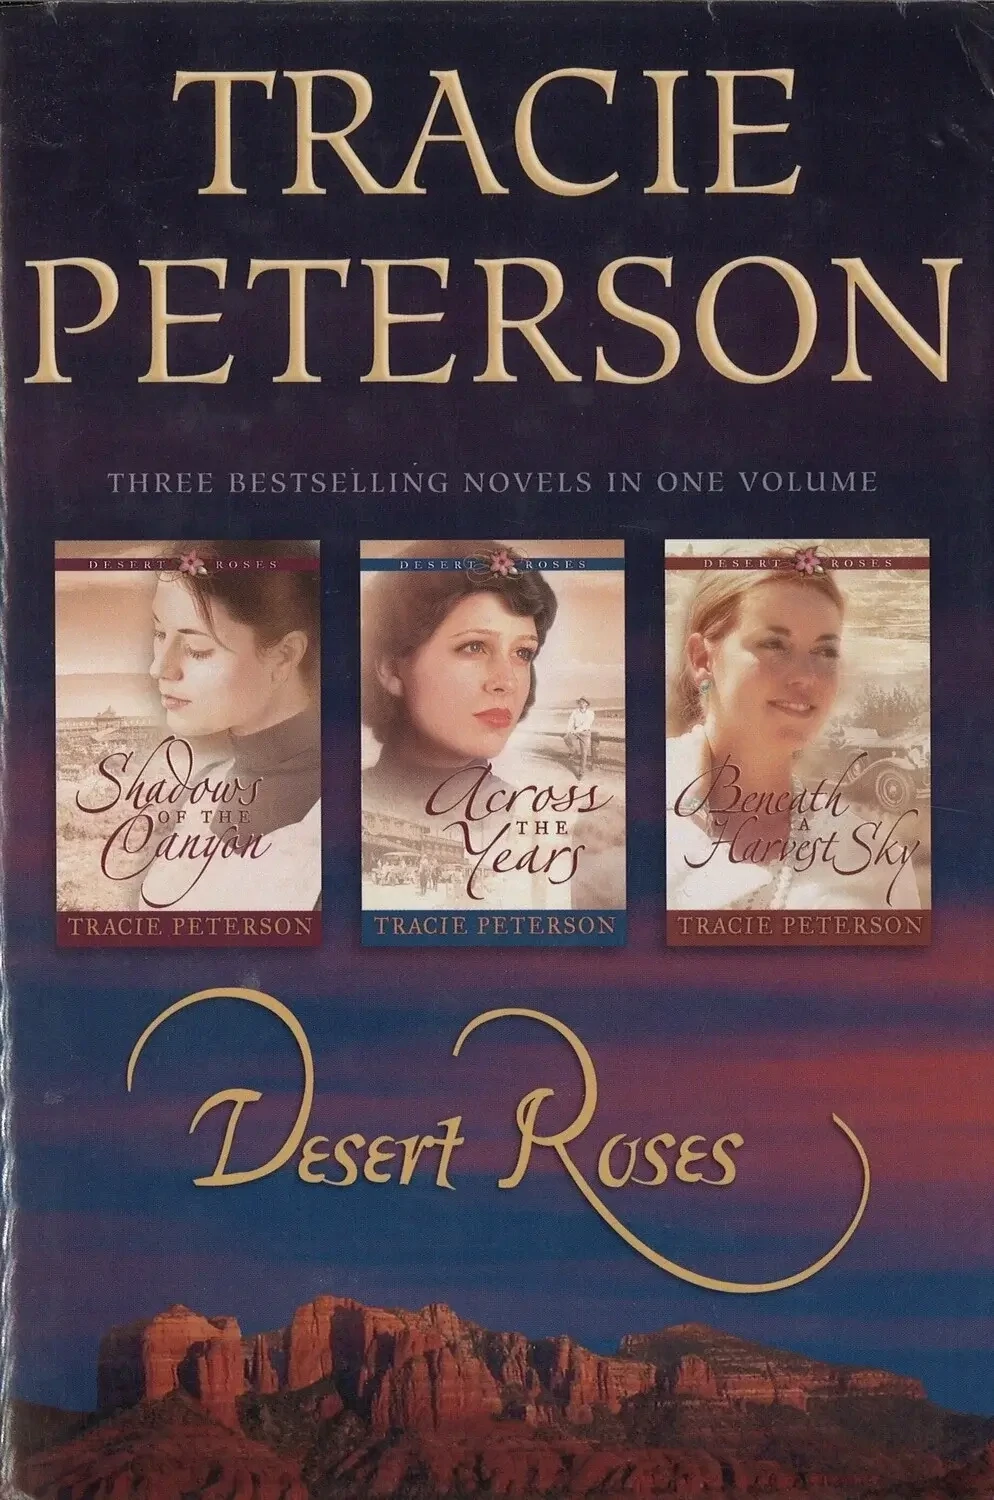 Desert Roses by Tracie Peterson